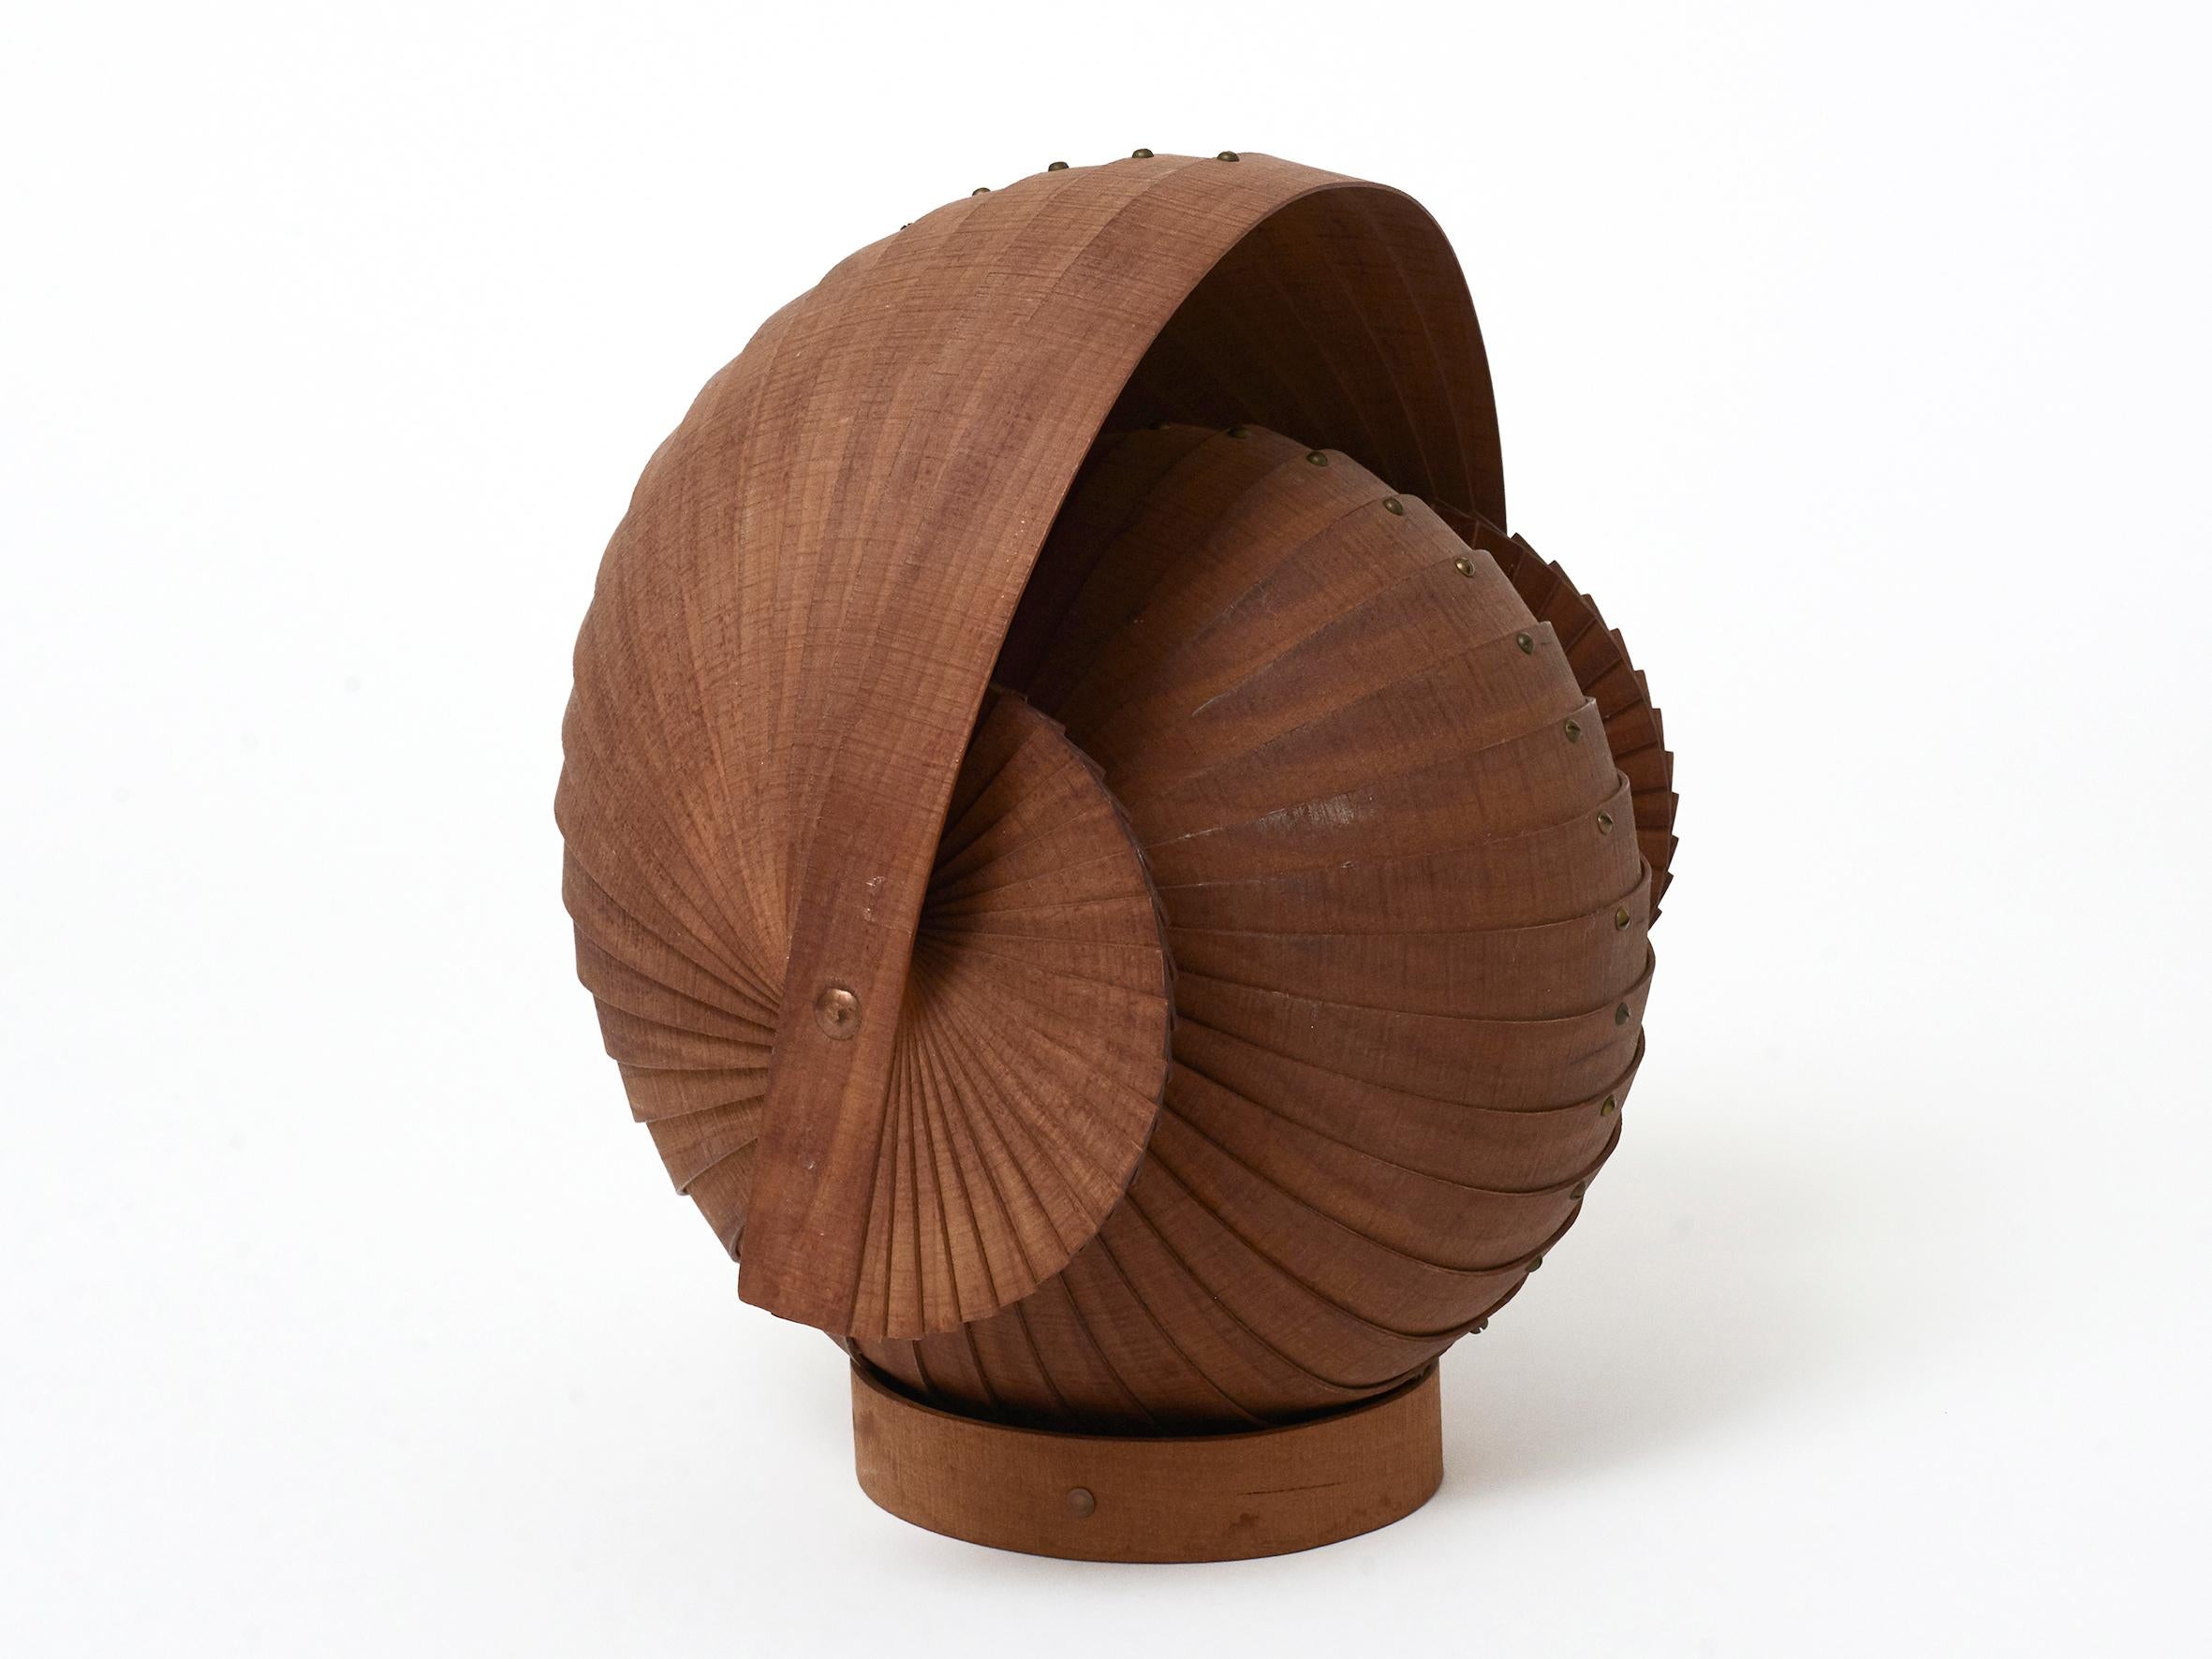 A beautifully made bentwood head or nautilus form sculpture with brass screws and copper rivets. Found in France and probably from the 1970s. Sits on an oval base and shows well in multiple positions. Some water marks on the base and small scuffs on